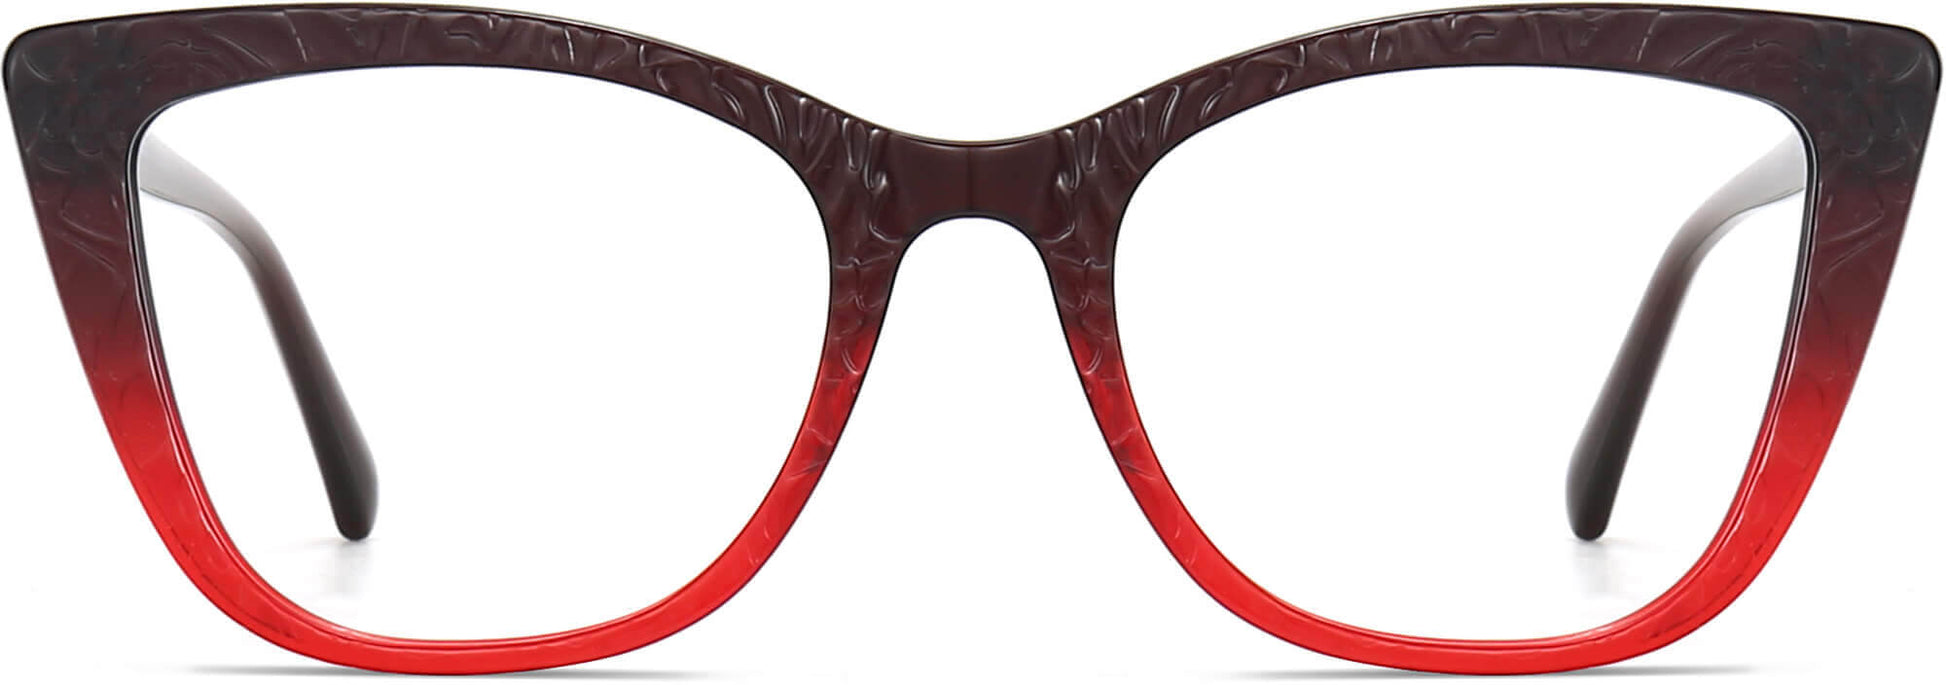 Angelina Cateye Red Eyeglasses from ANRRI, front view